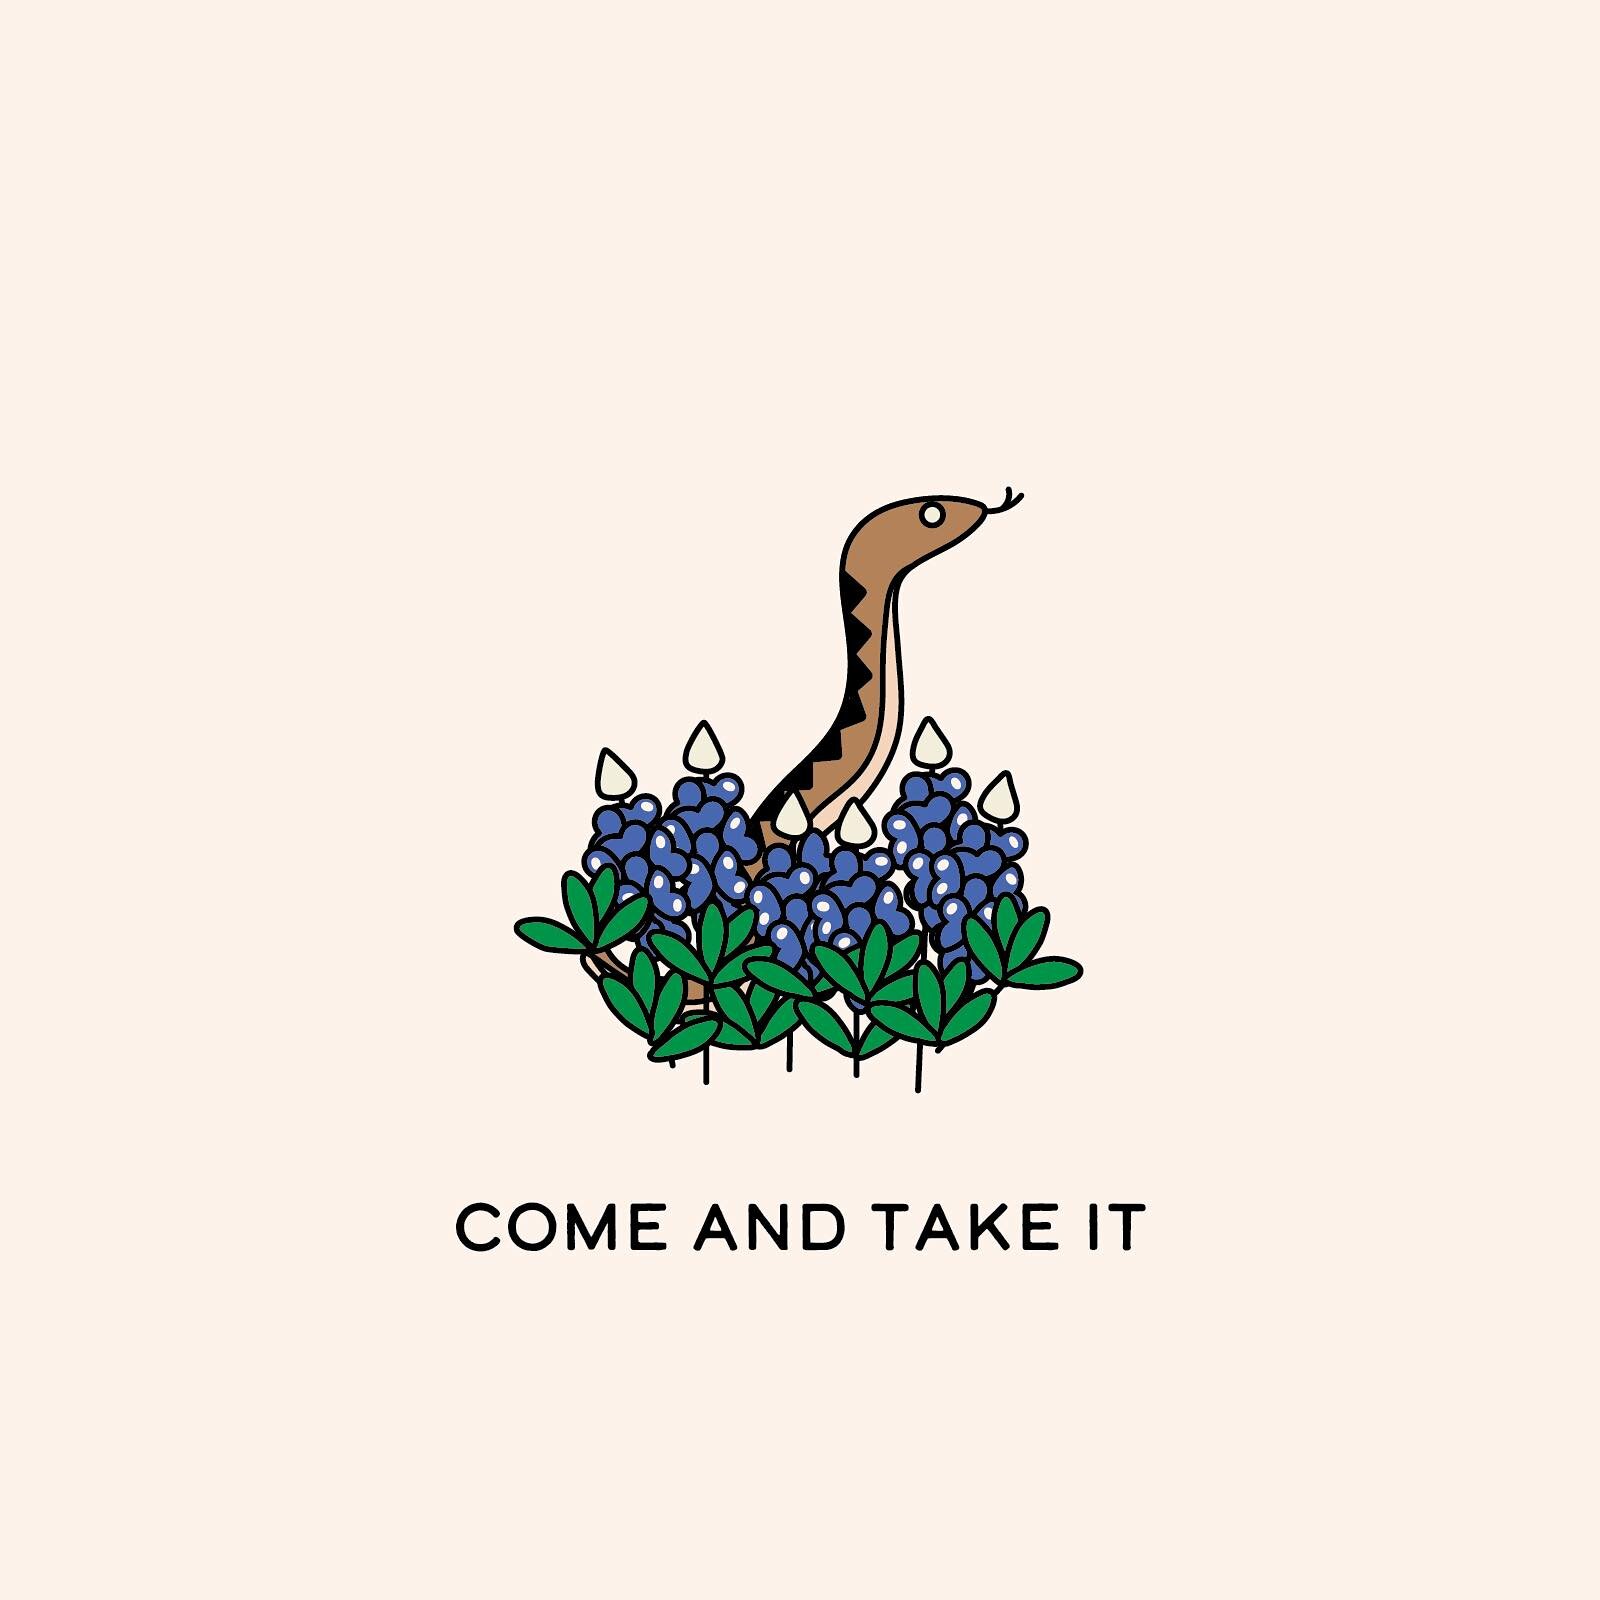 📸 Basically the rattlesnakes here say, &ldquo;go ahead, I dare you to take that picture.&rdquo; A little Texas PSA as you eye those bluebonnet photo ops 😬

#illustration #digitalillustration #graphicillustration #womenwhodraw #instaart #digitalart 